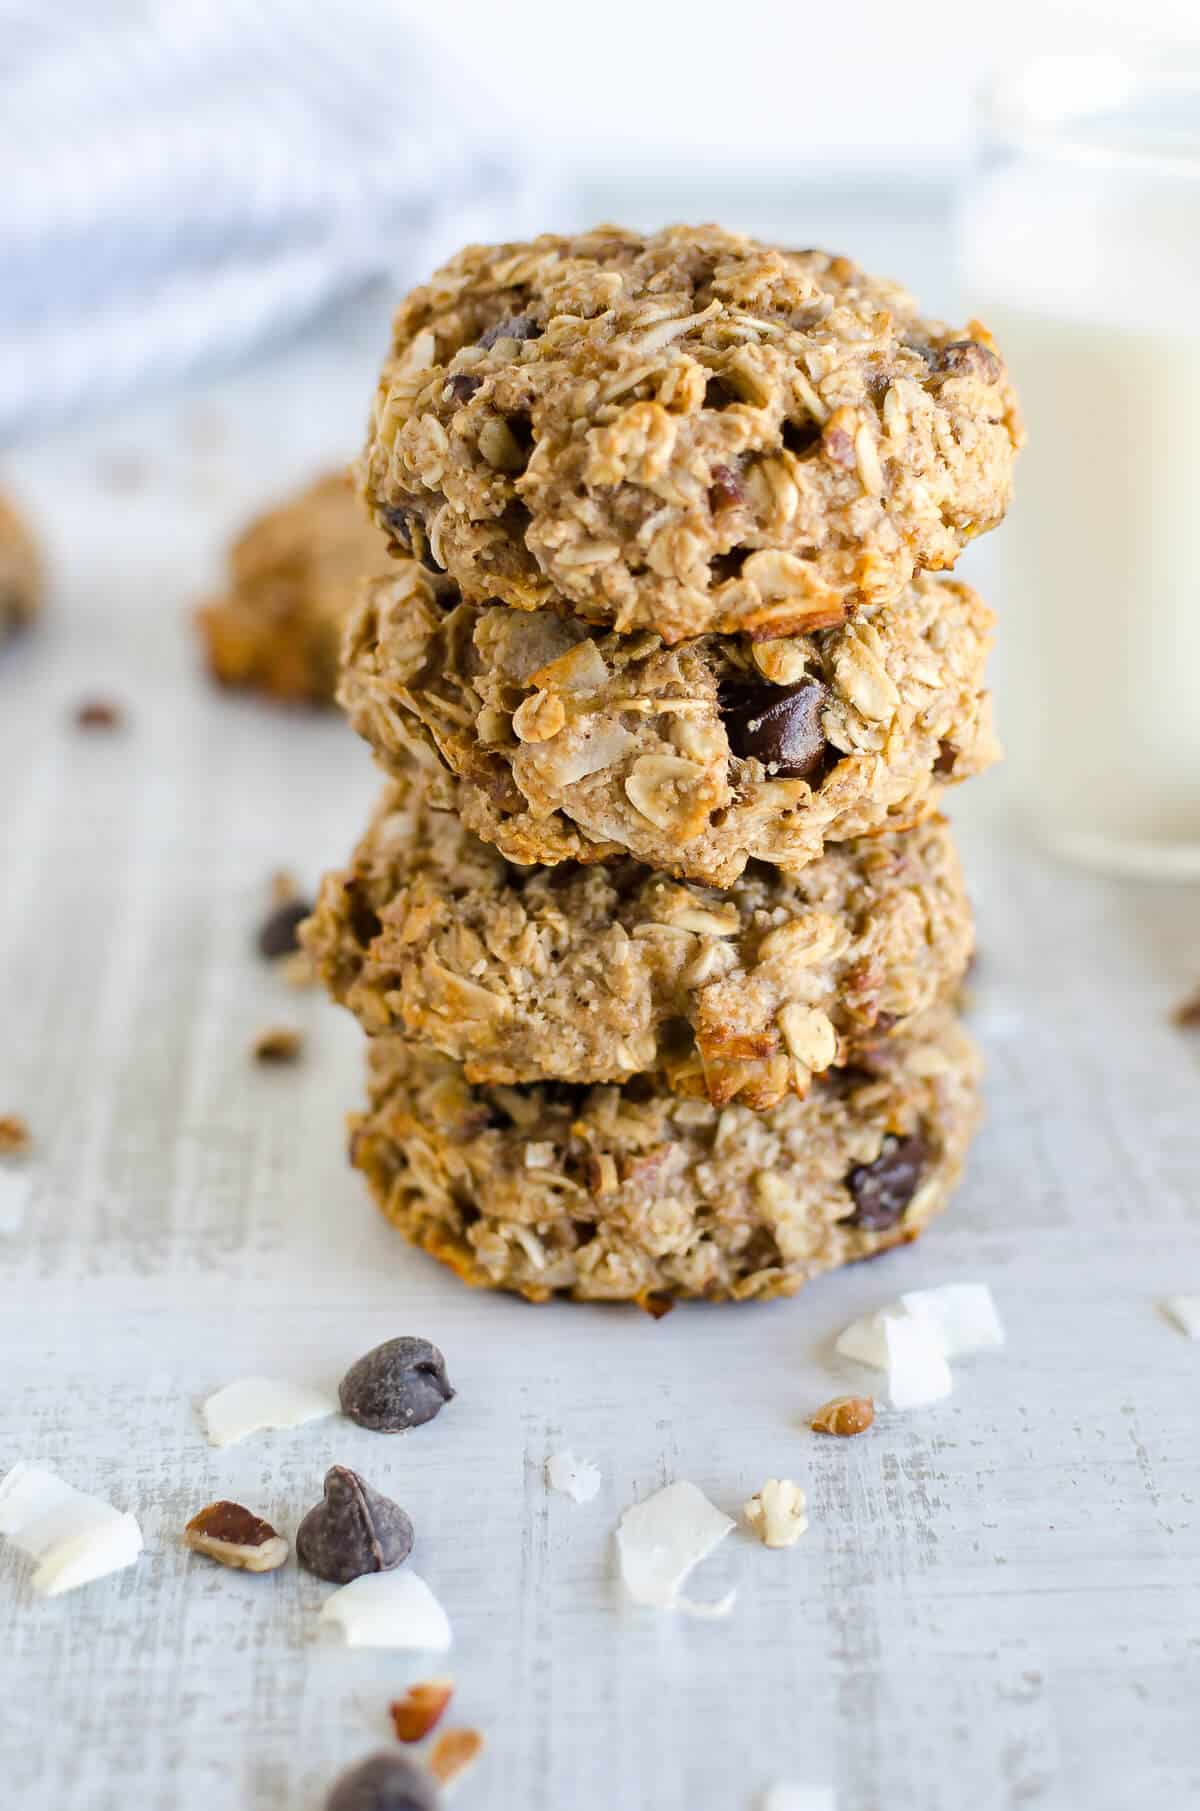 stack of breakfast cookies made with oatmeal, bananas, almond flour, coconut and chocolate chips